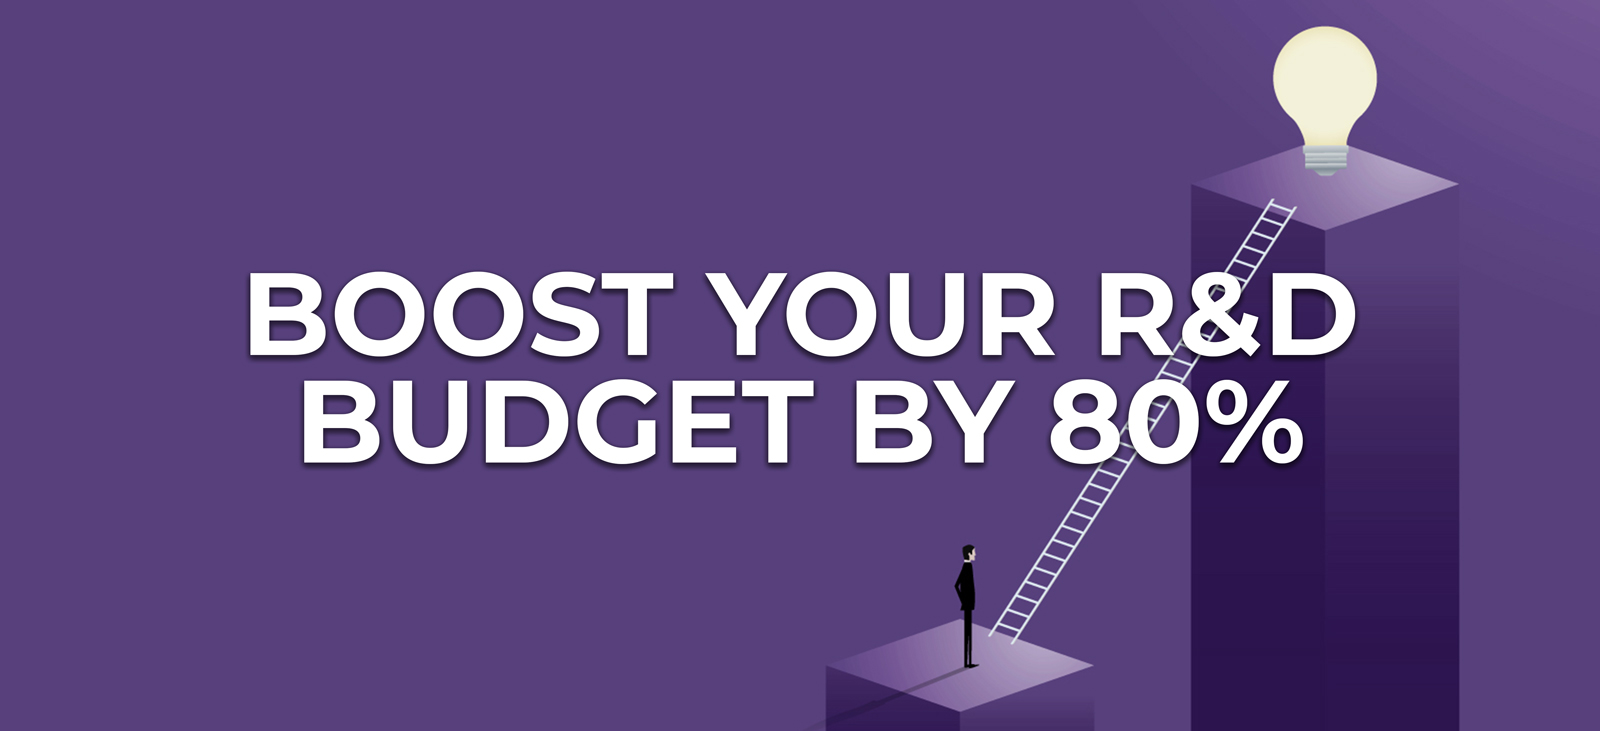 Boost Your R&D Budget